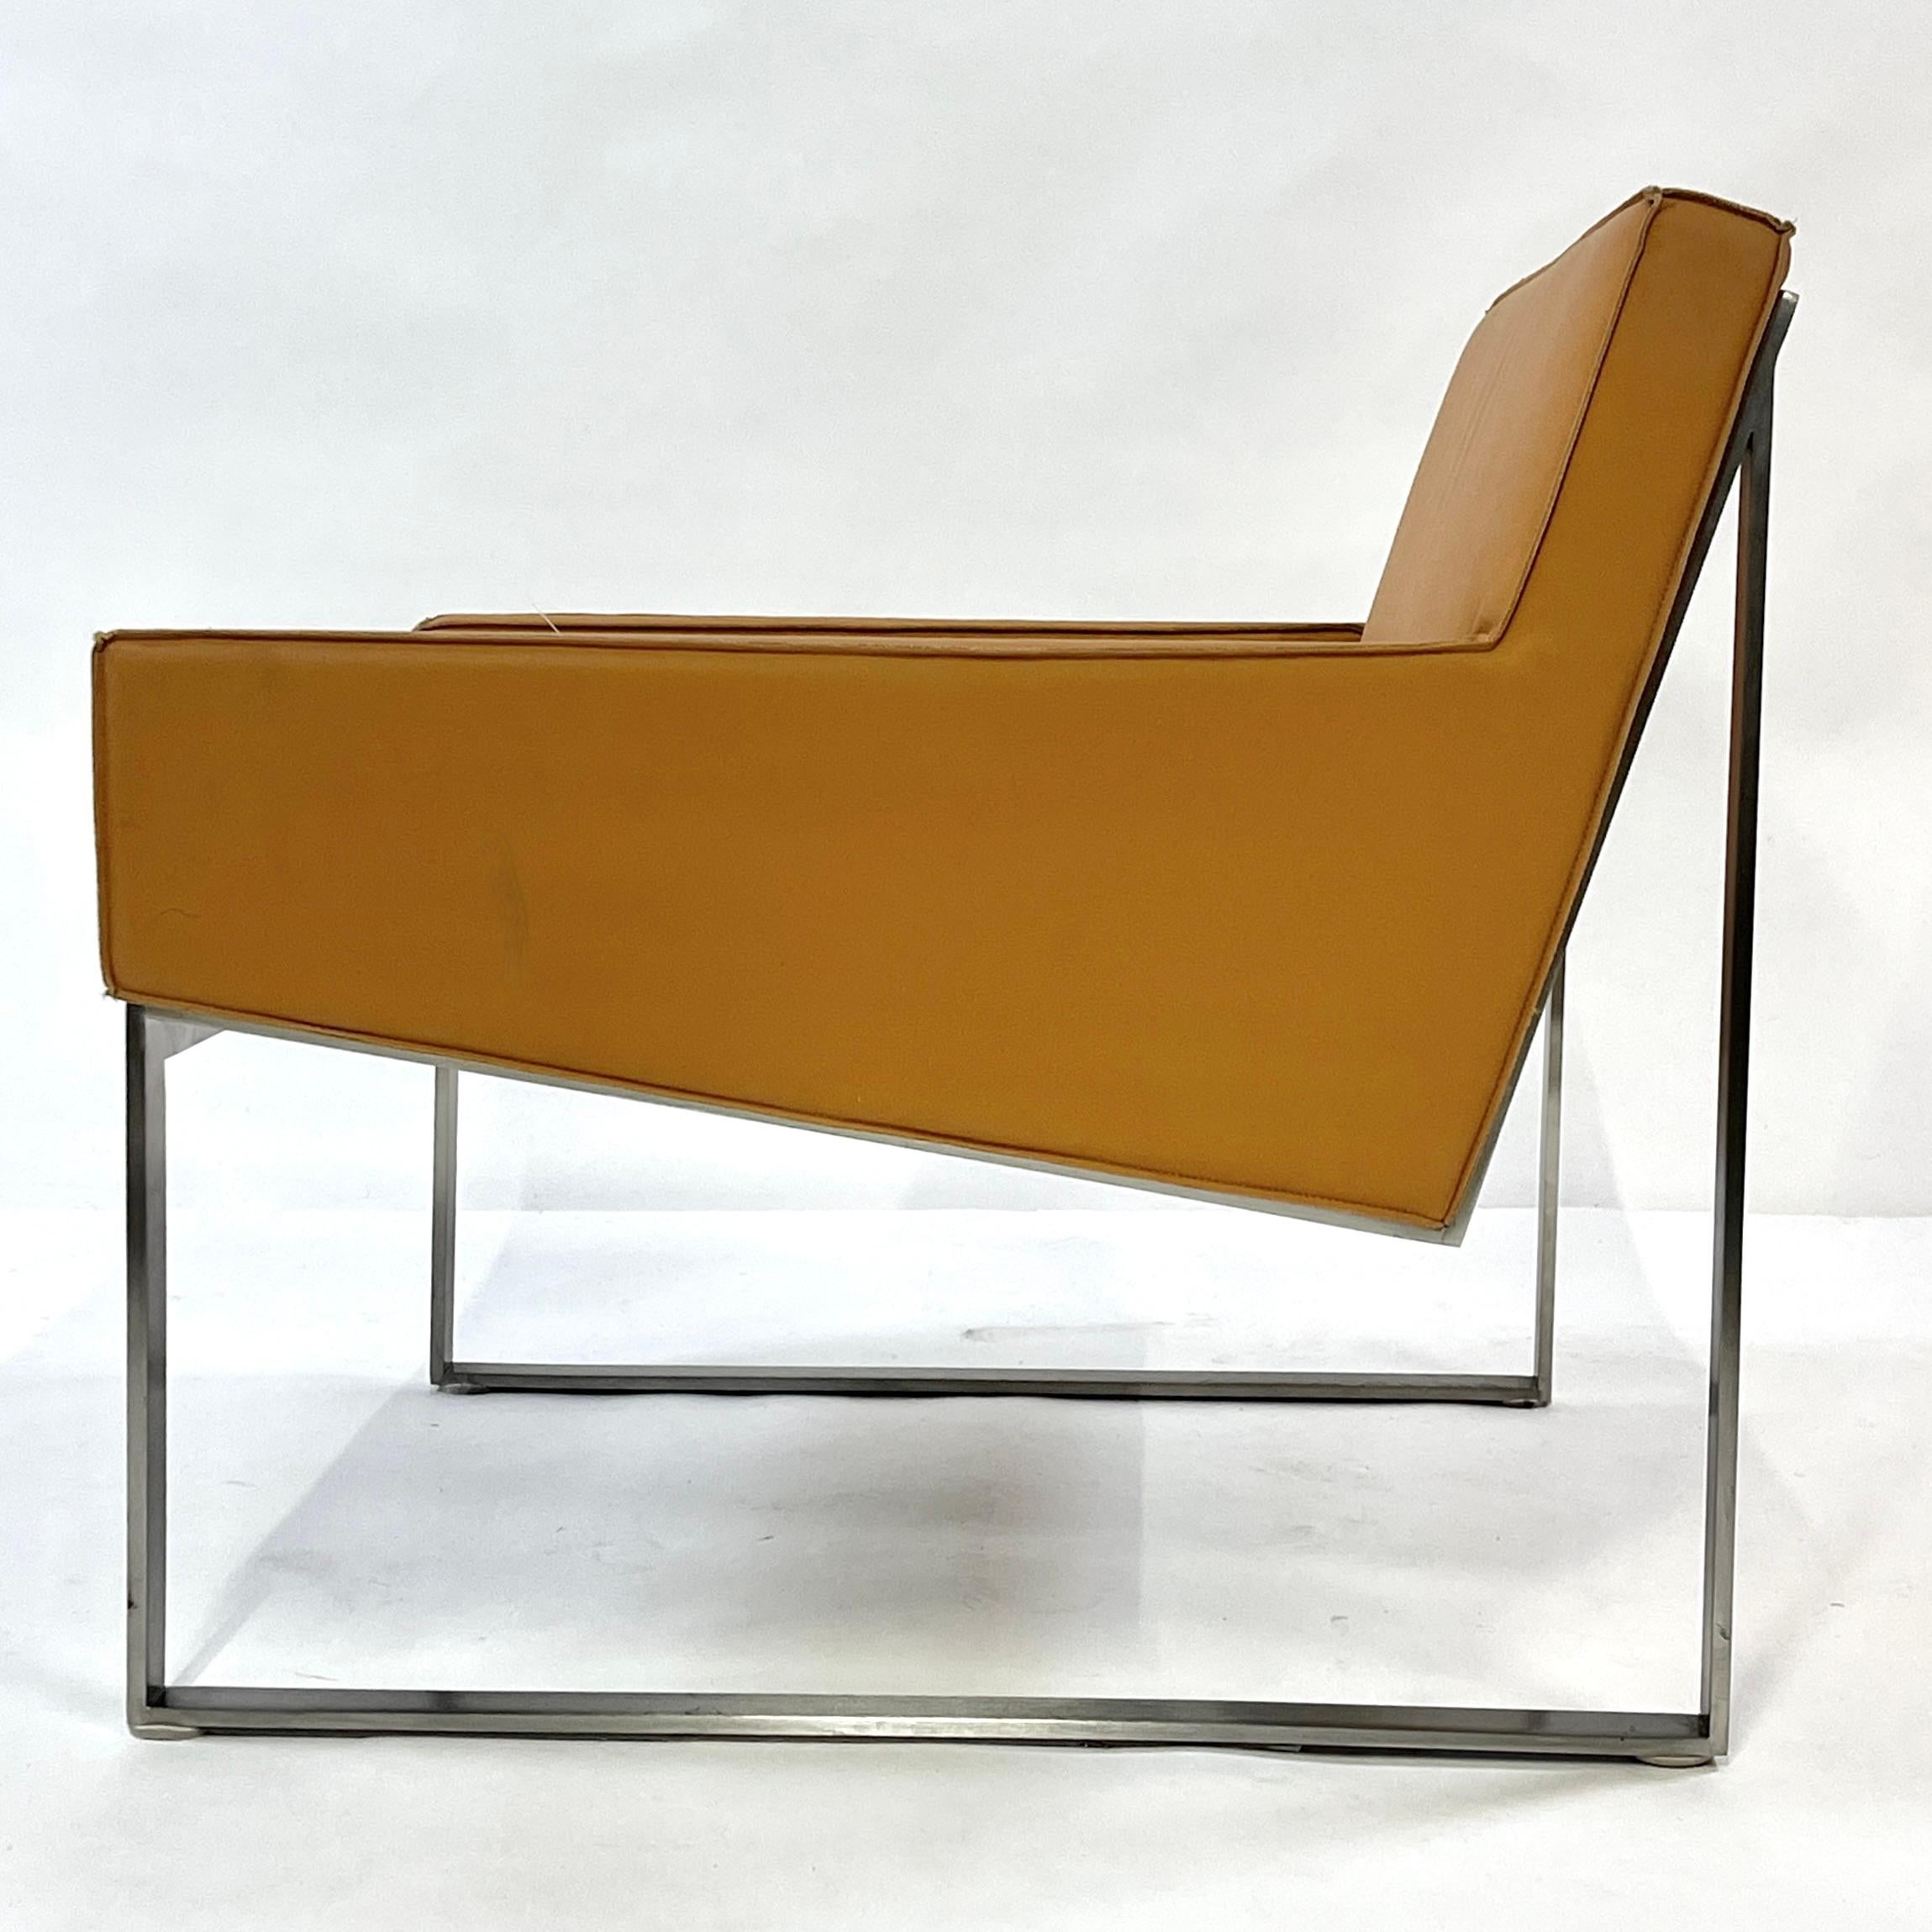 Contemporary Tan Leather & Brushed Nickel Lounge Chairs by Fabien Baron -Bernhardt 4 Avail For Sale